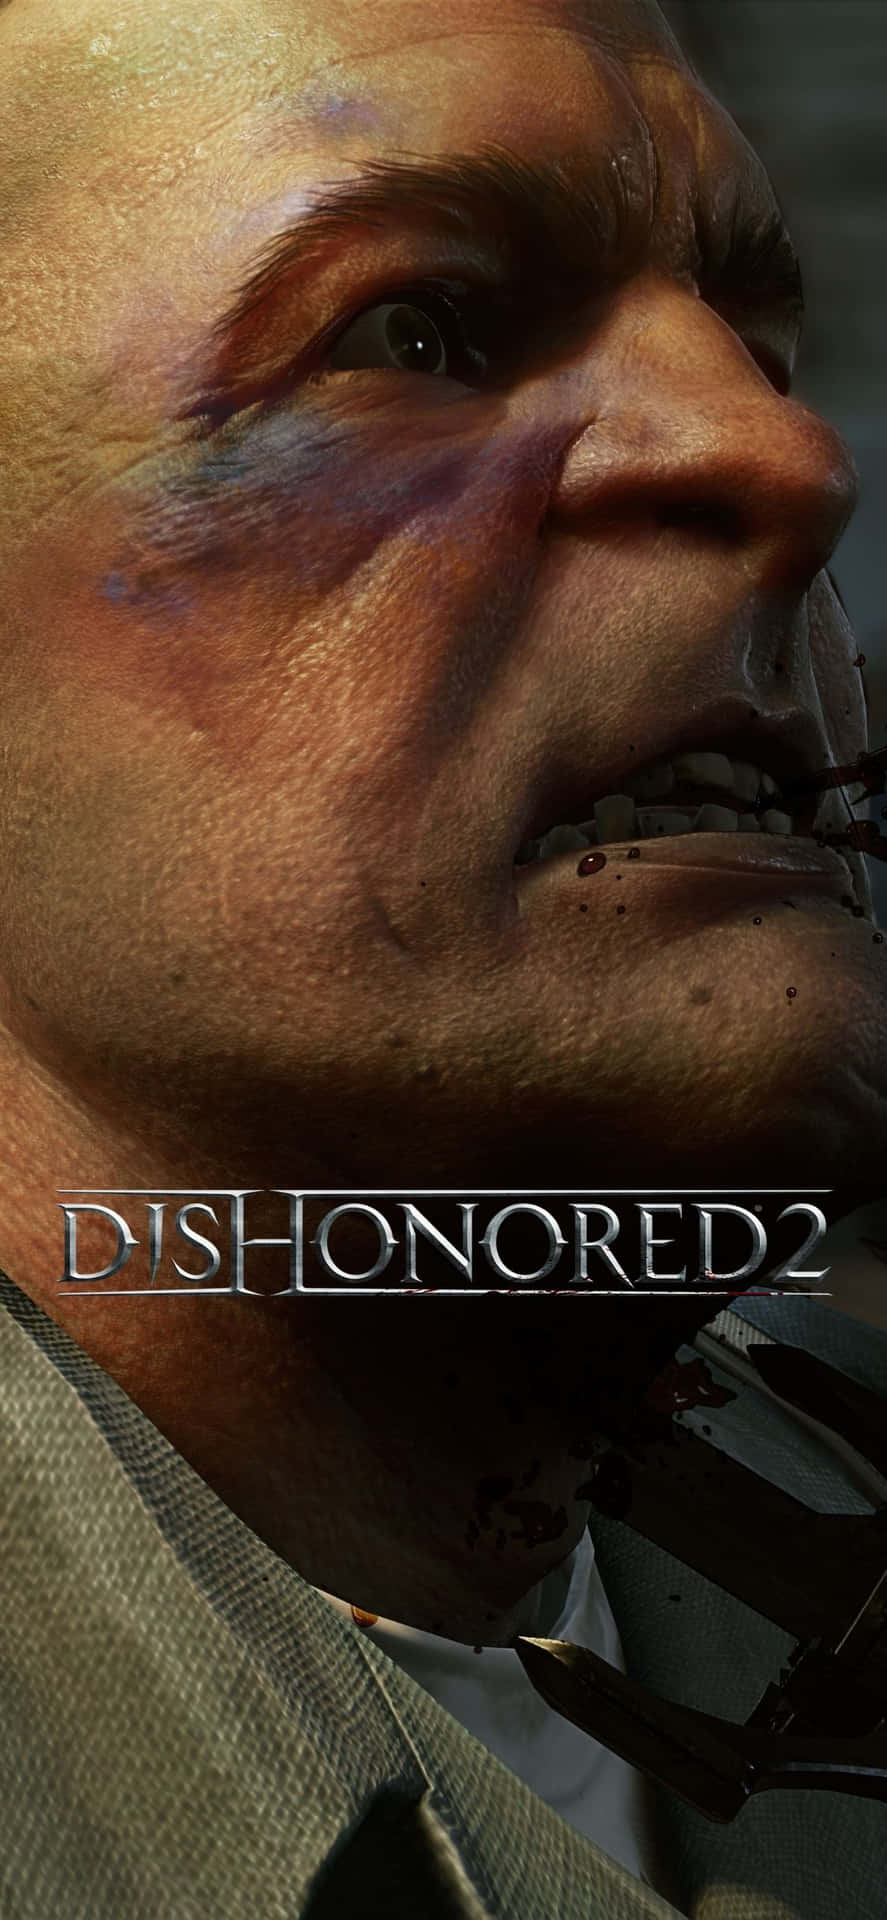 dishonored 2 - pc - pc - pc - pc - pc -